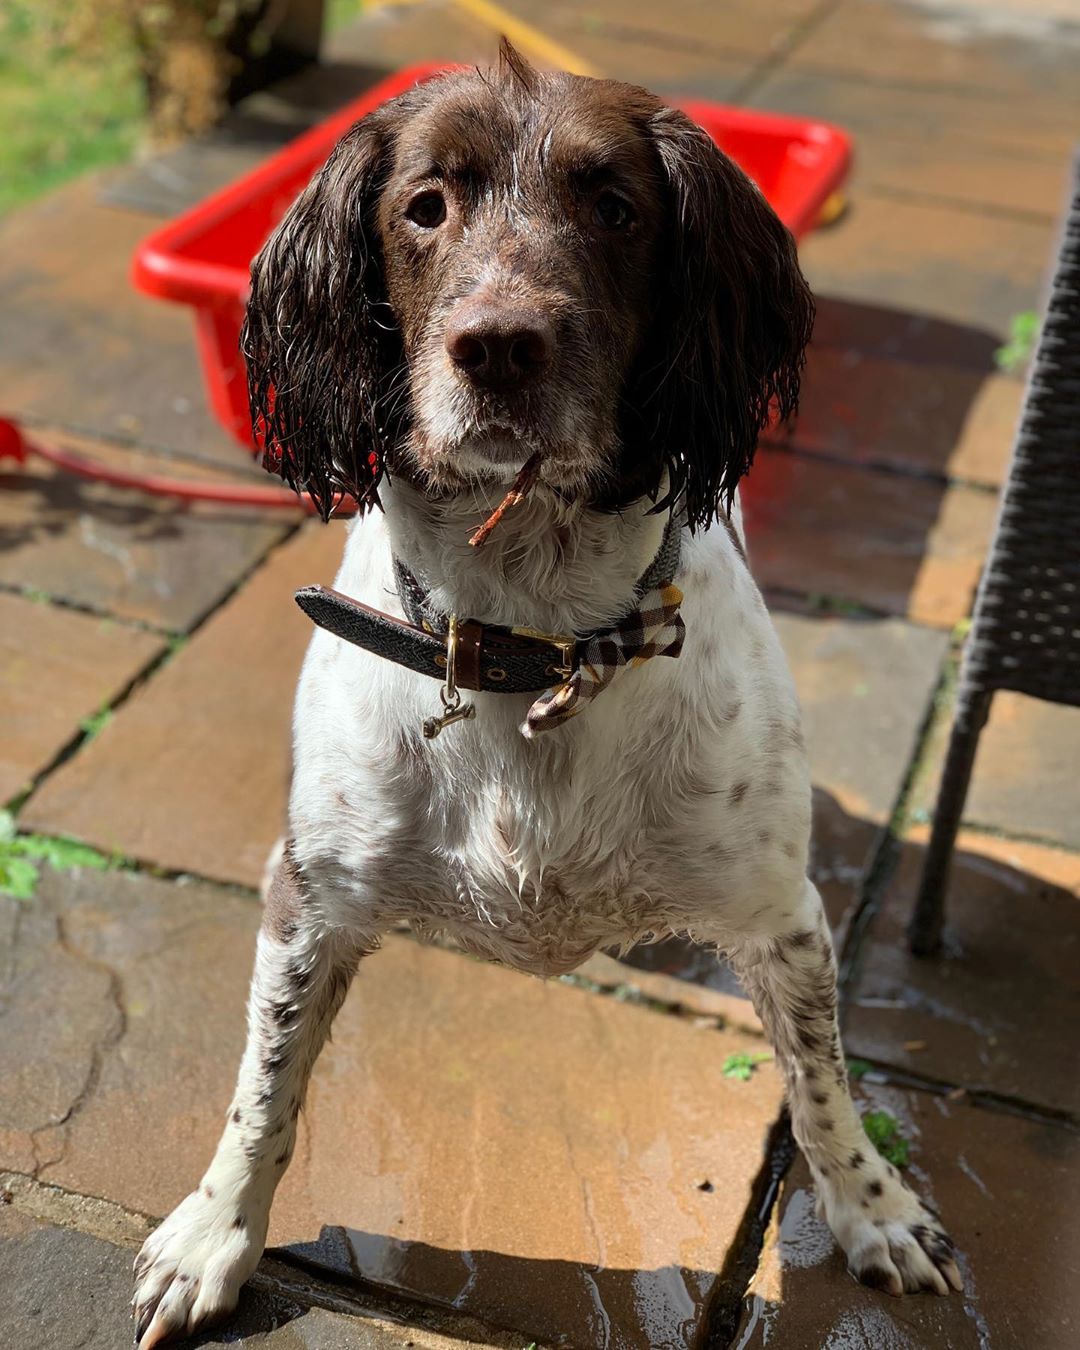 A wet English Springer Spaniel standing on the pavement